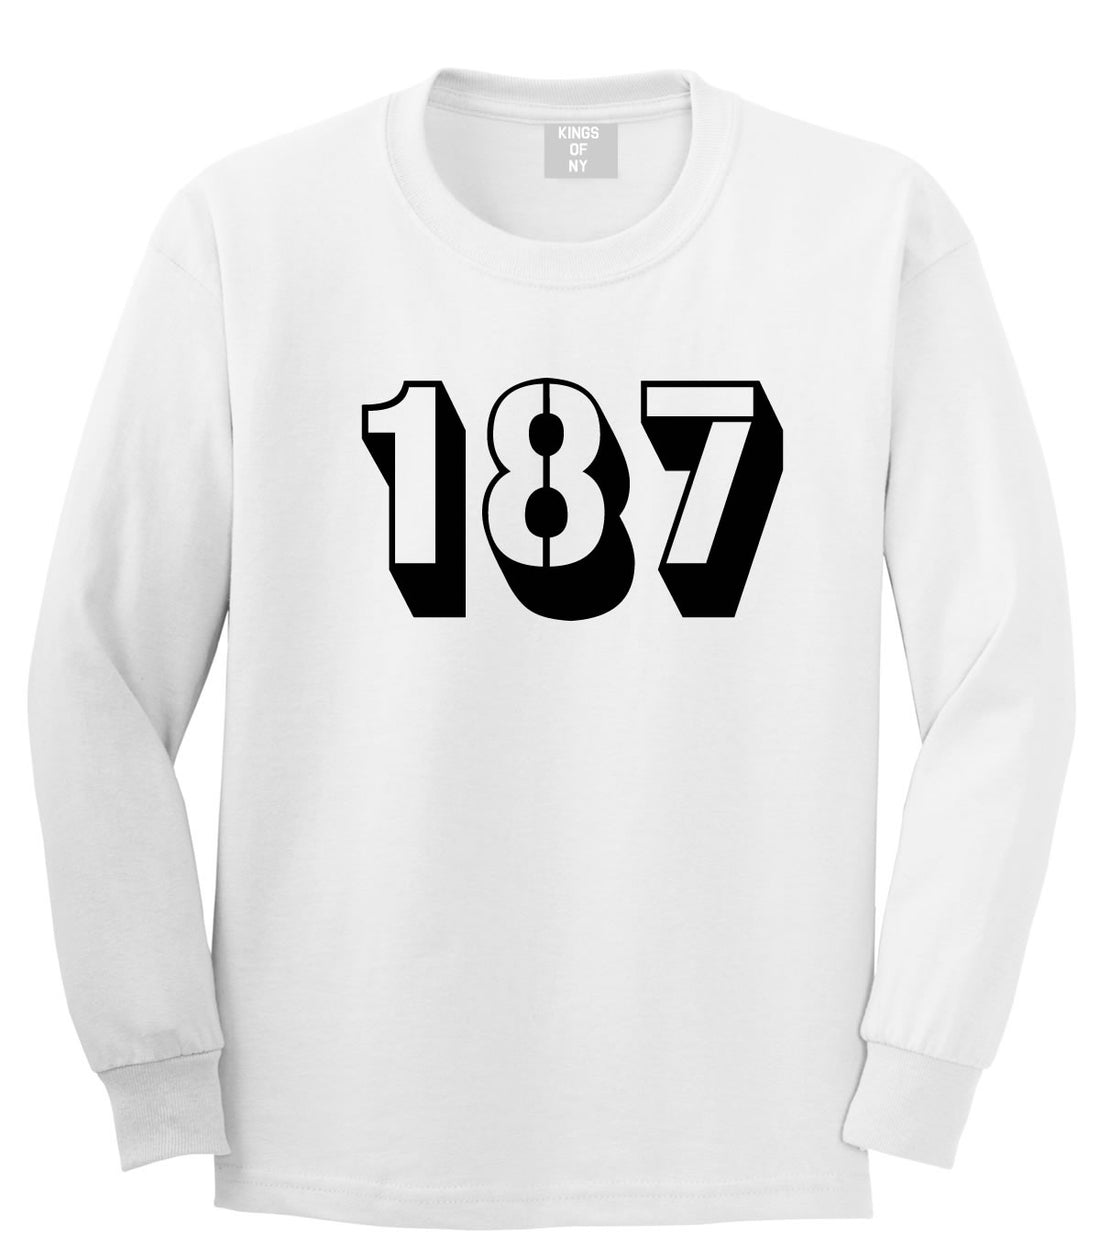 187 Long Sleeve T-Shirt in White by Kings Of NY